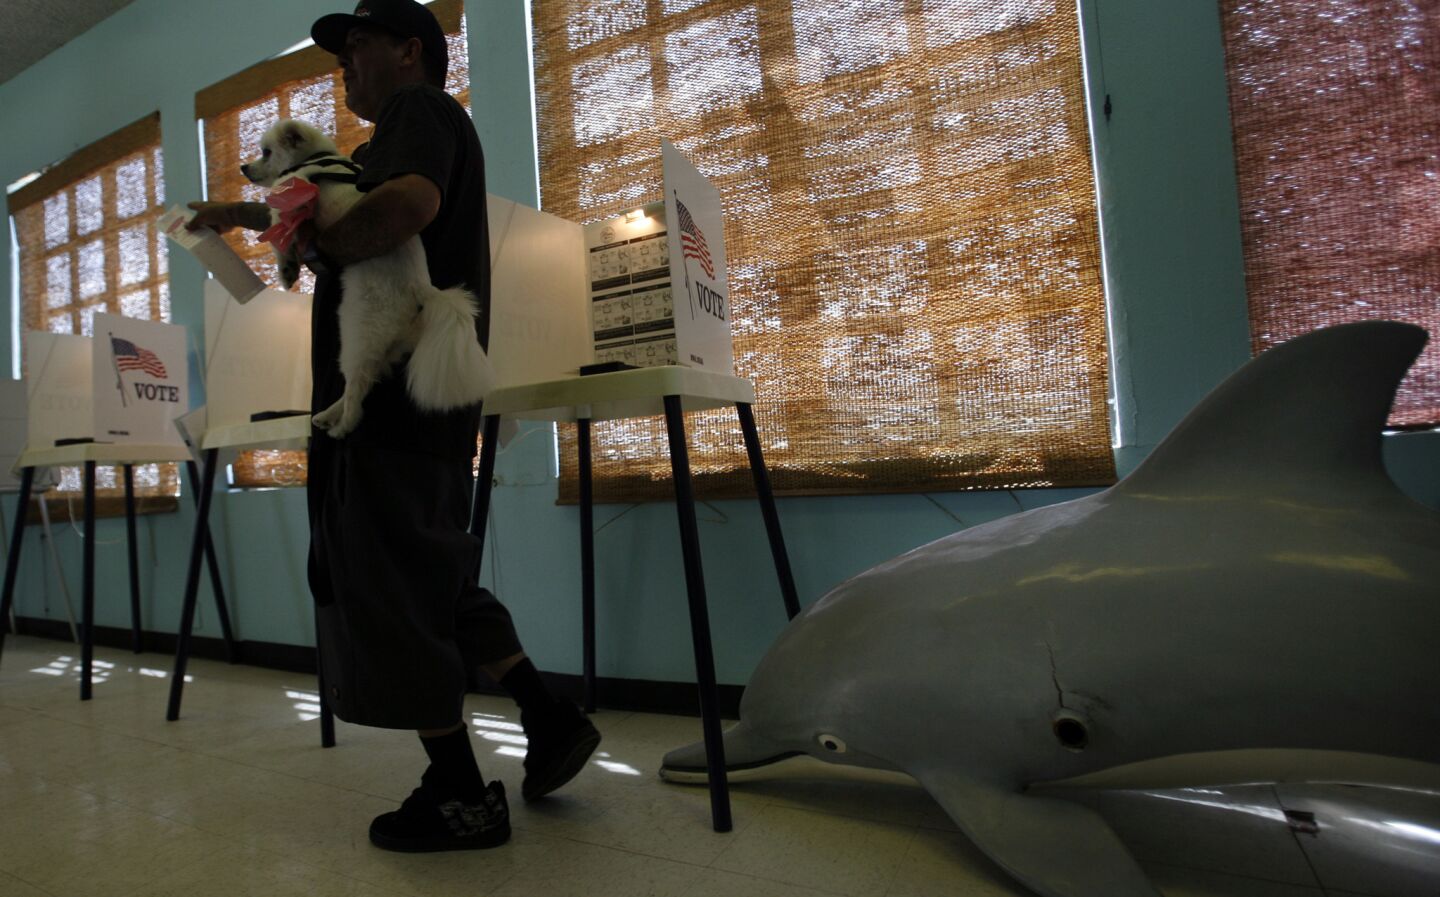 Paul Maes walks away from the polling booth to turn in his ballot as he carries his dog, Rocko, next to a leaping dolphin at the Cetacean Society building at Point Fermin Park in San Pedro.